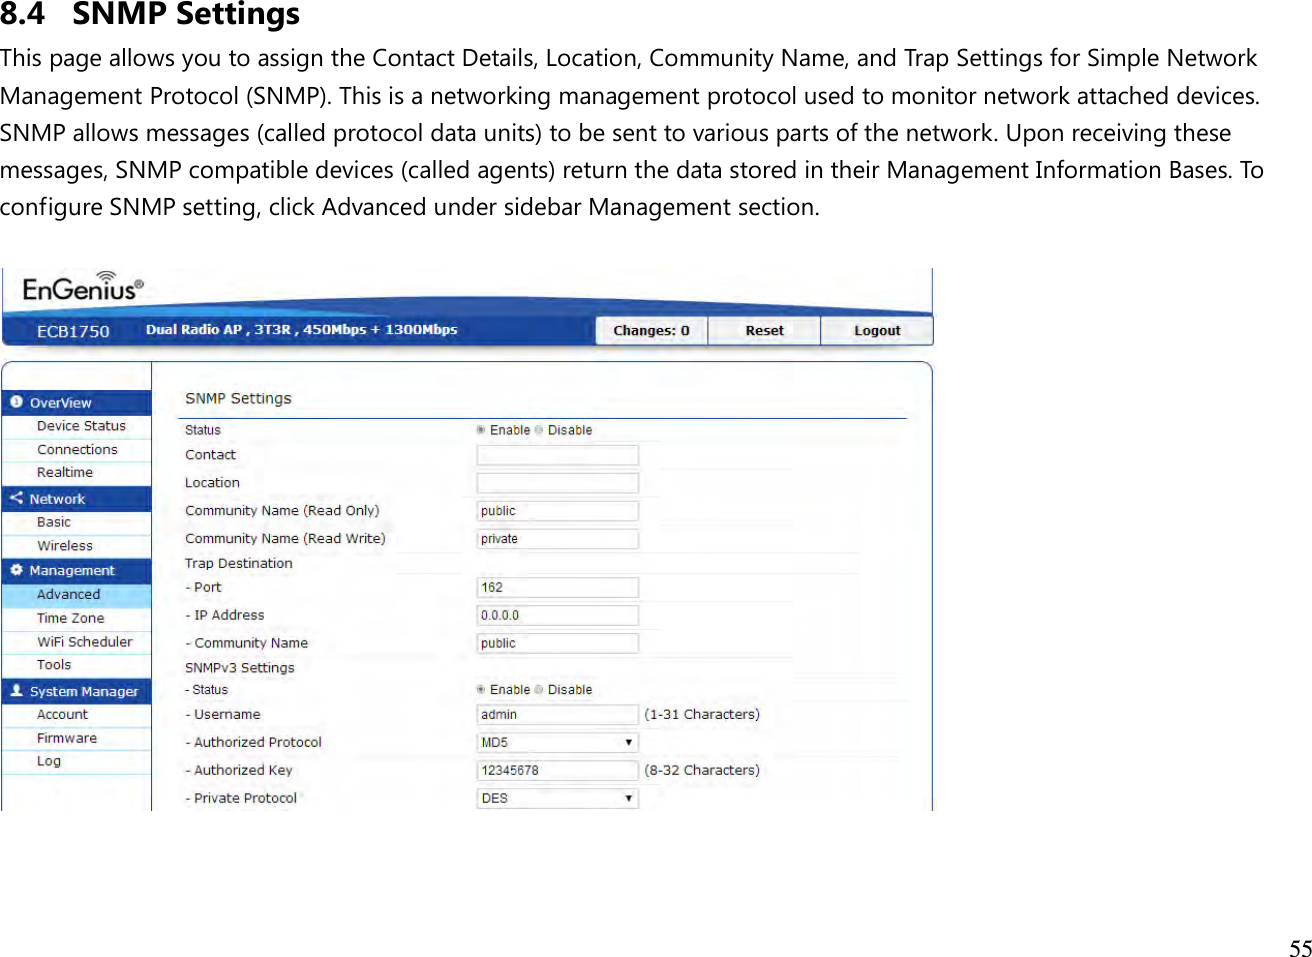  55  8.4 SNMP Settings This page allows you to assign the Contact Details, Location, Community Name, and Trap Settings for Simple Network Management Protocol (SNMP). This is a networking management protocol used to monitor network attached devices. SNMP allows messages (called protocol data units) to be sent to various parts of the network. Upon receiving these messages, SNMP compatible devices (called agents) return the data stored in their Management Information Bases. To configure SNMP setting, click Advanced under sidebar Management section.     